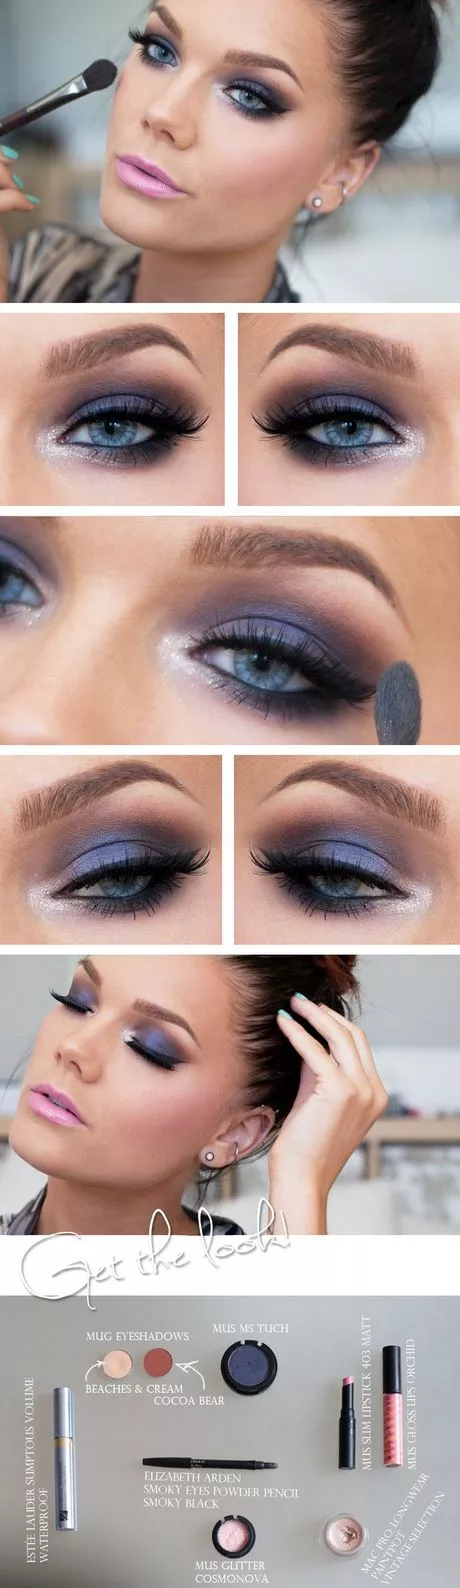 new-years-eve-makeup-tutorial-silver-24_4-13 New years eve make-up tutorial zilver